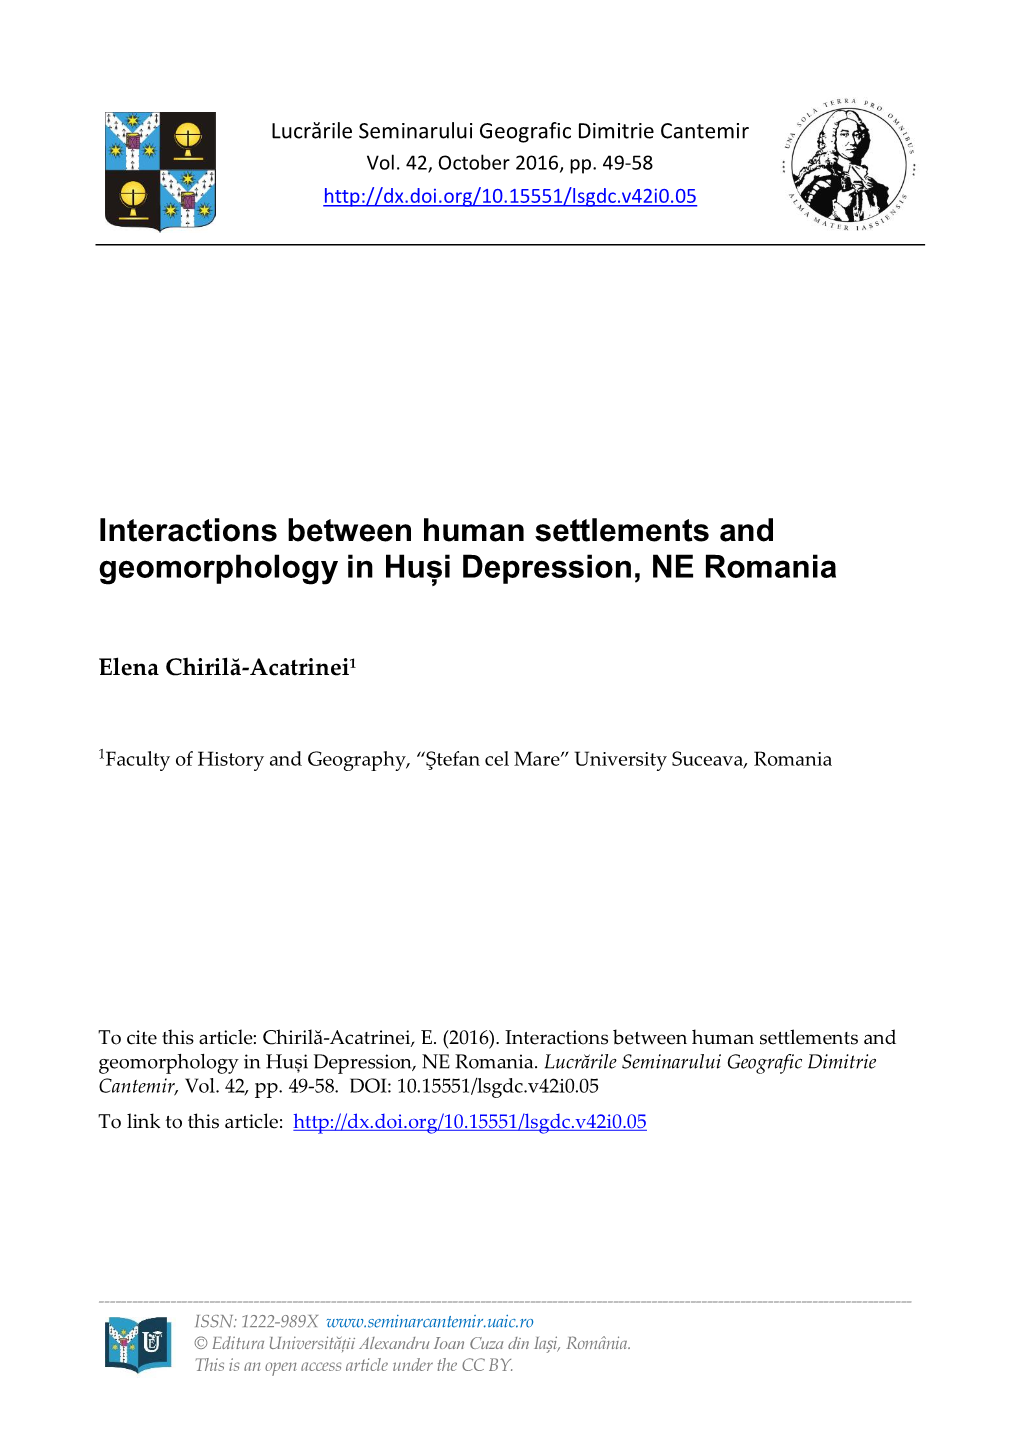 Interactions Between Human Settlements and Geomorphology in Huși Depression, NE Romania